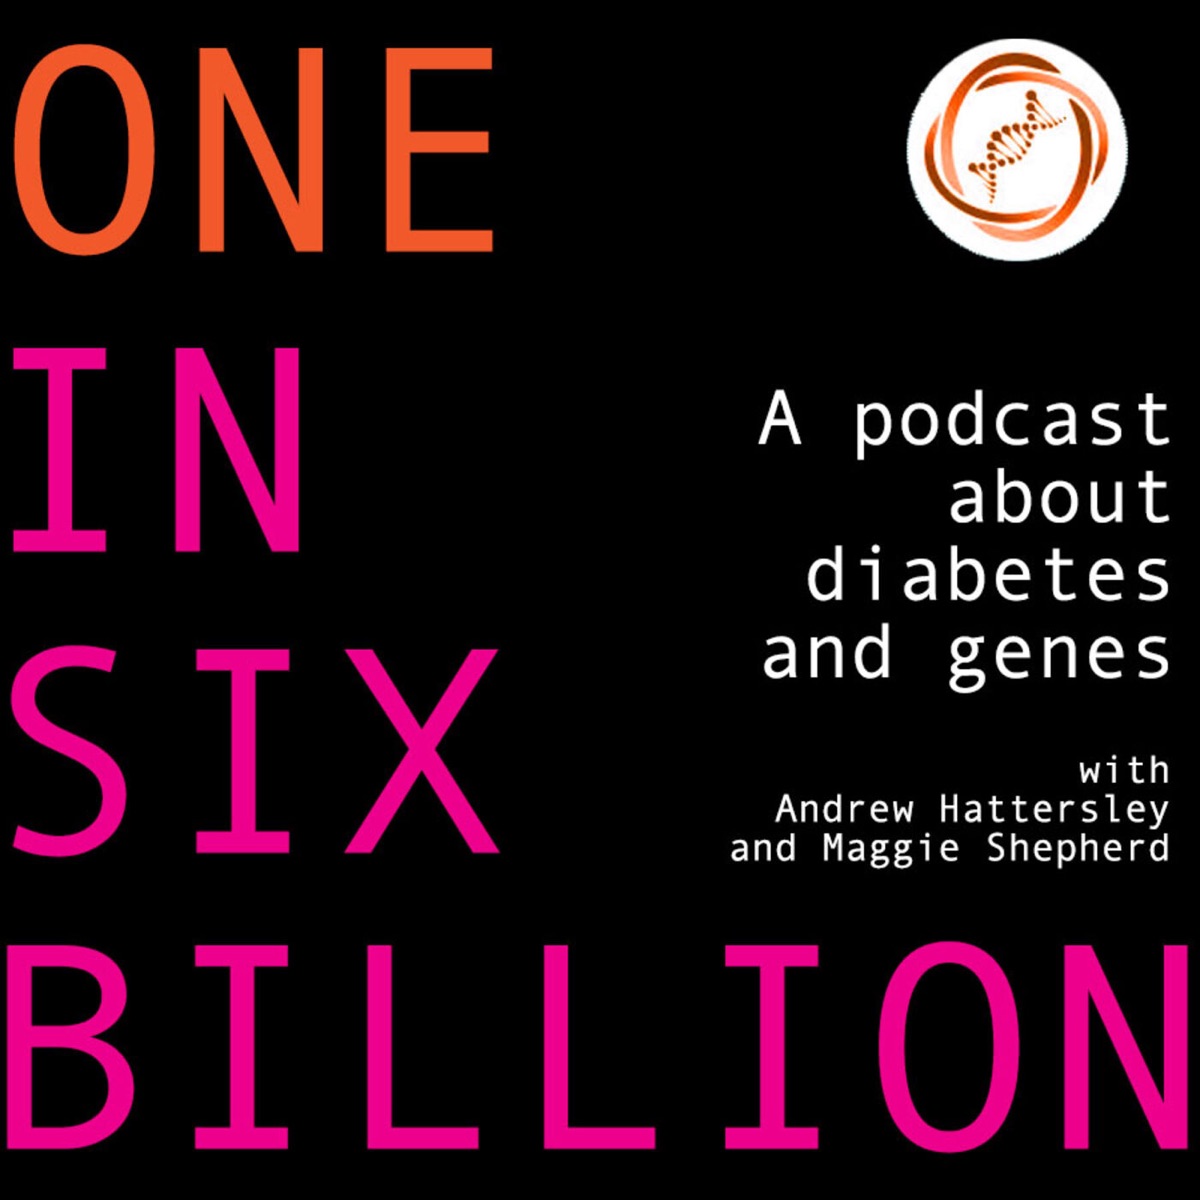 🔸Interested in Diabetes❓ 🔹Interested in Science❓ 🔸Want to hear uplifting stories❓ 🙏@athattersley ➕@MaggieShepher13 🔹I promise 🥹😭😊😂 during Ep1 👉Just 👂to this👇 🔗1in6b.com 🔗open.spotify.com/show/7hDPQZyoZ… @parthaskar @kamleshkhunti @drmarkporter